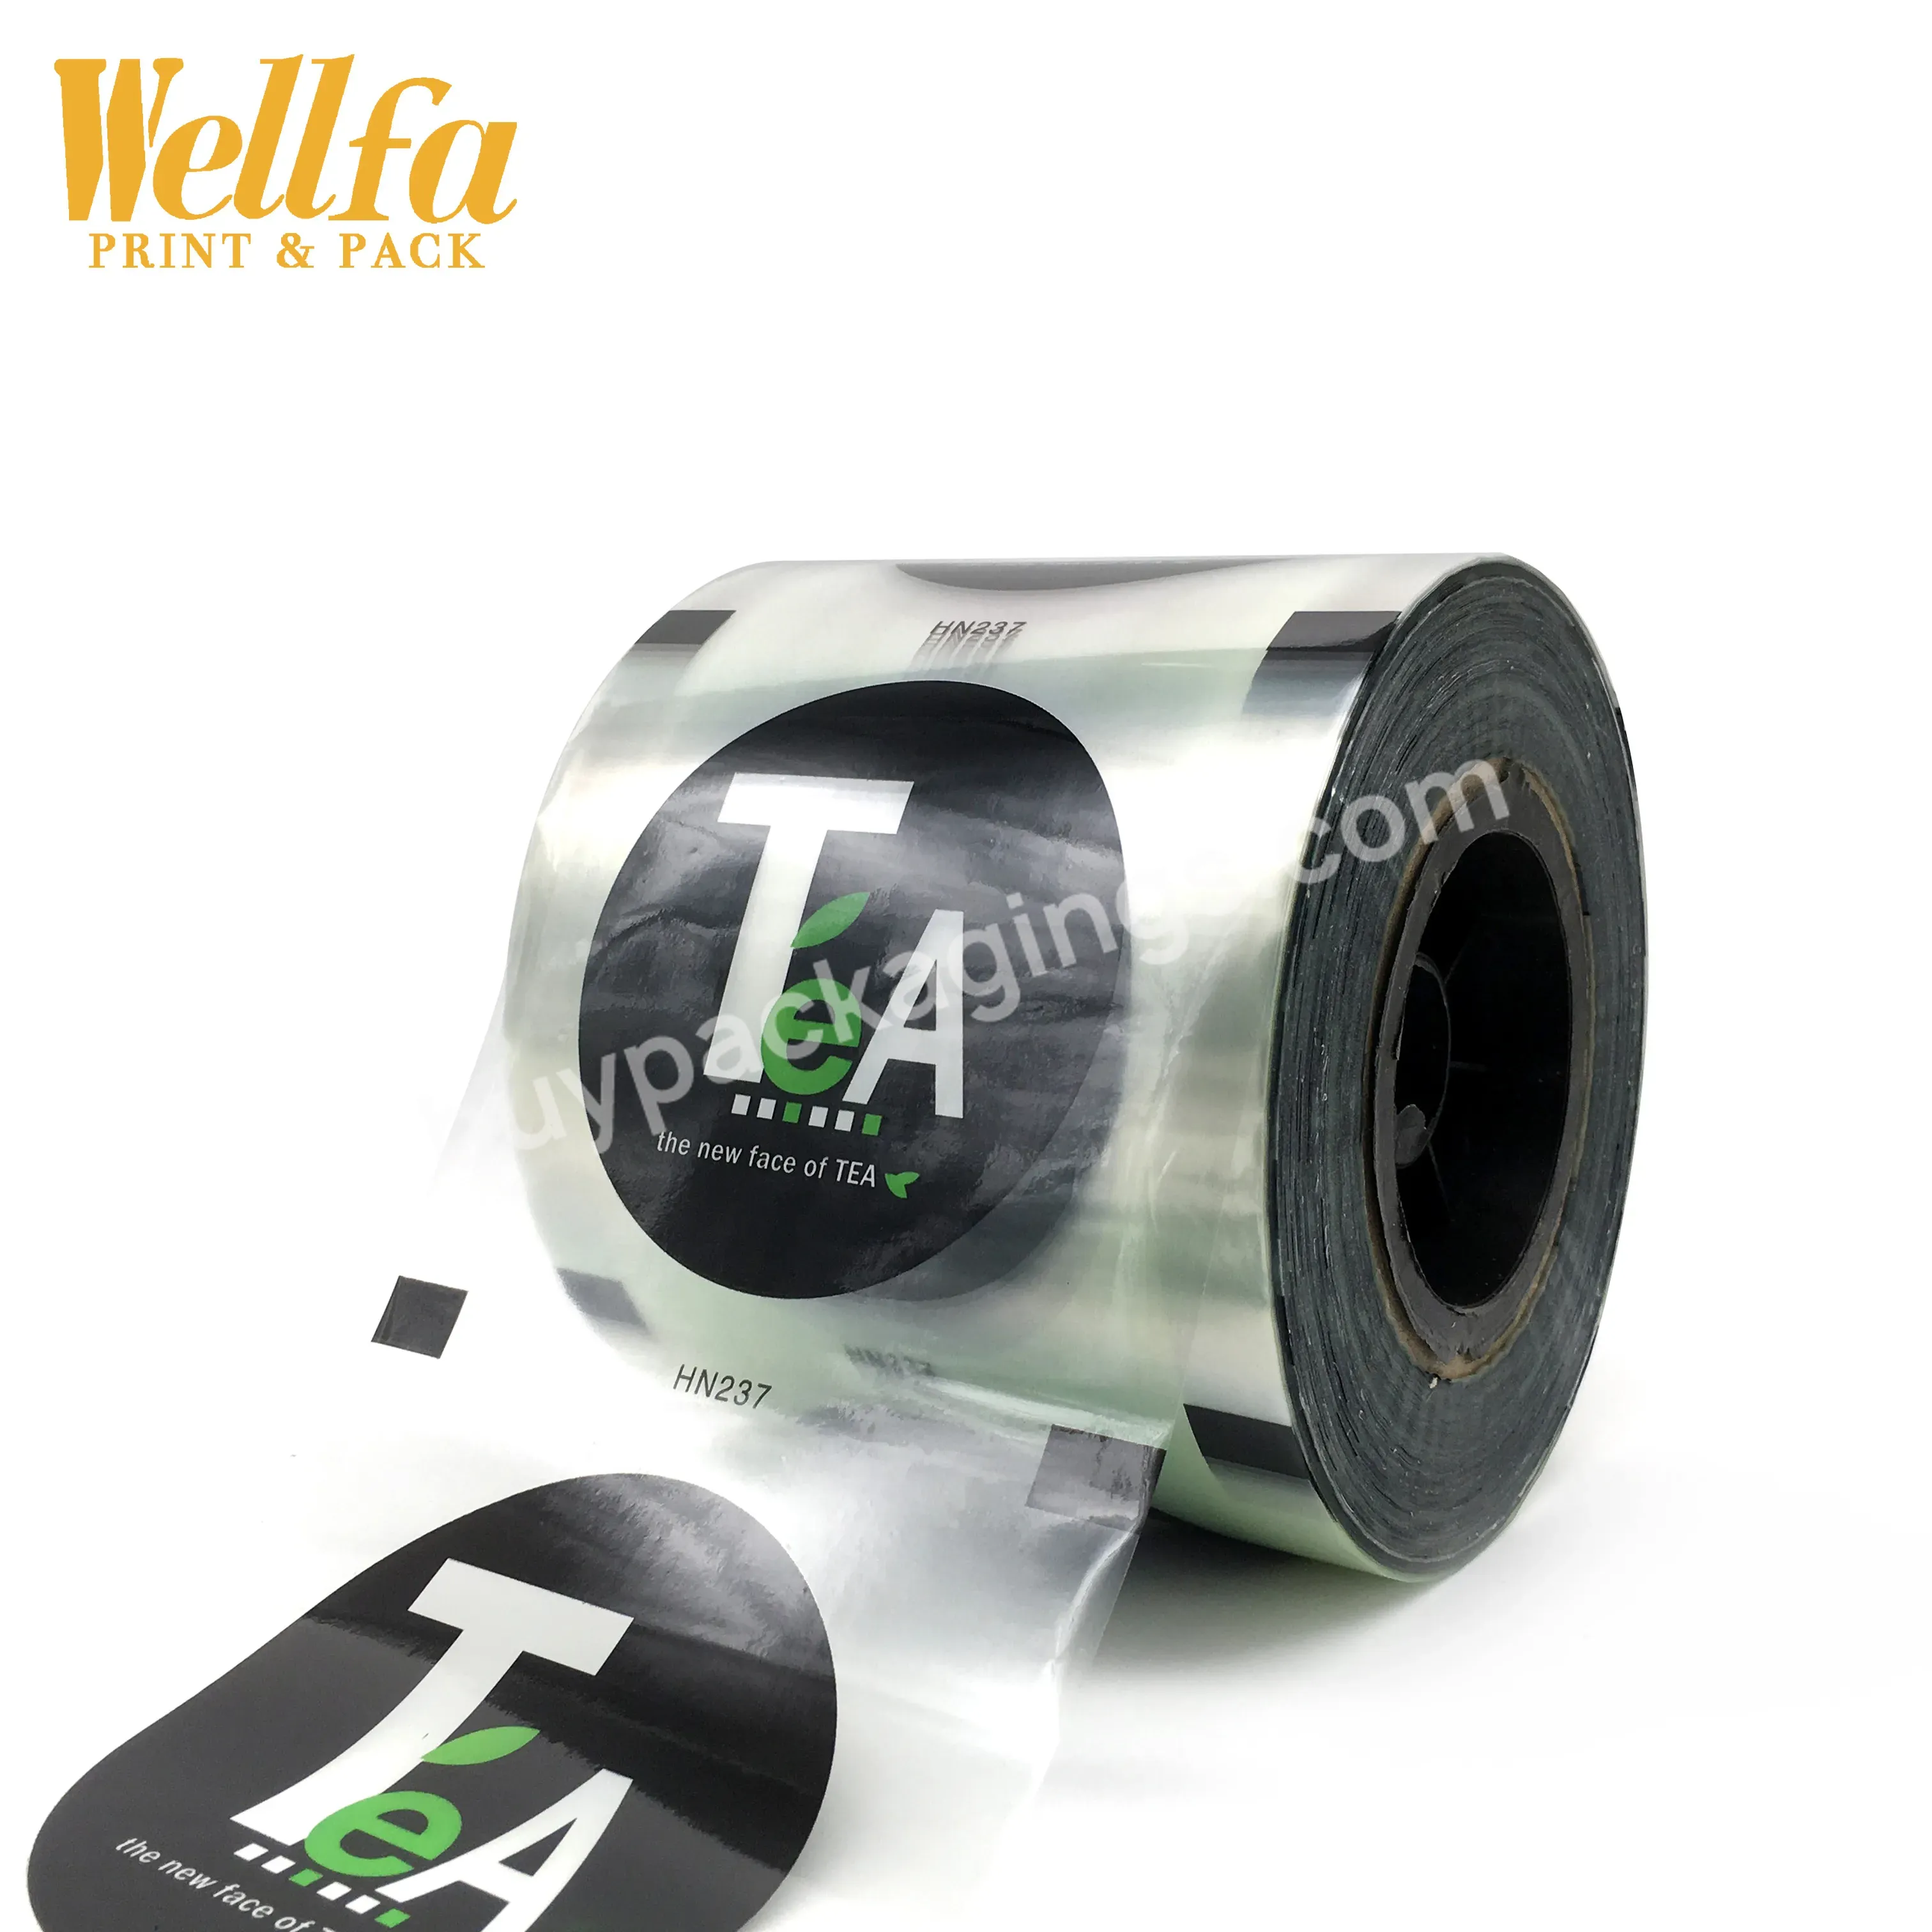 Factory Customized Oem Printed Laminating Flexible Packaging Sachet Roll For Auto Packing Cup Sealing Film Plastic Films - Buy Bopp/vmpet/pe Flexible Bubble Tea Sealing Film,Heat Sealable Food Packaging Film Roll,Customized Drink Auto Packaging Film.